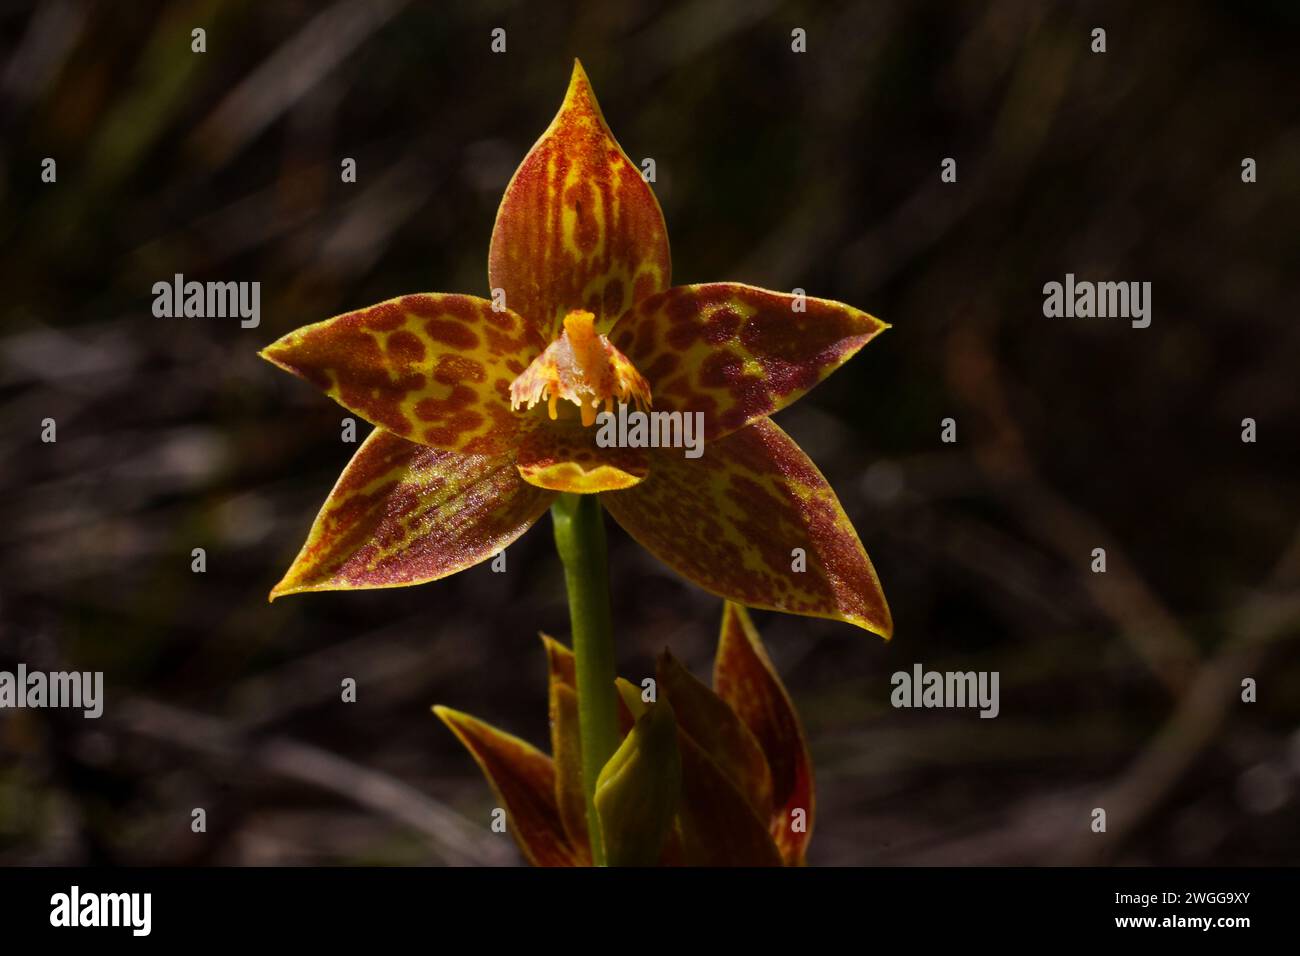 Yellow and brownish spotted flower of the endemic leopard orchid (Thelymitra benthamiana), Western Australia Stock Photo